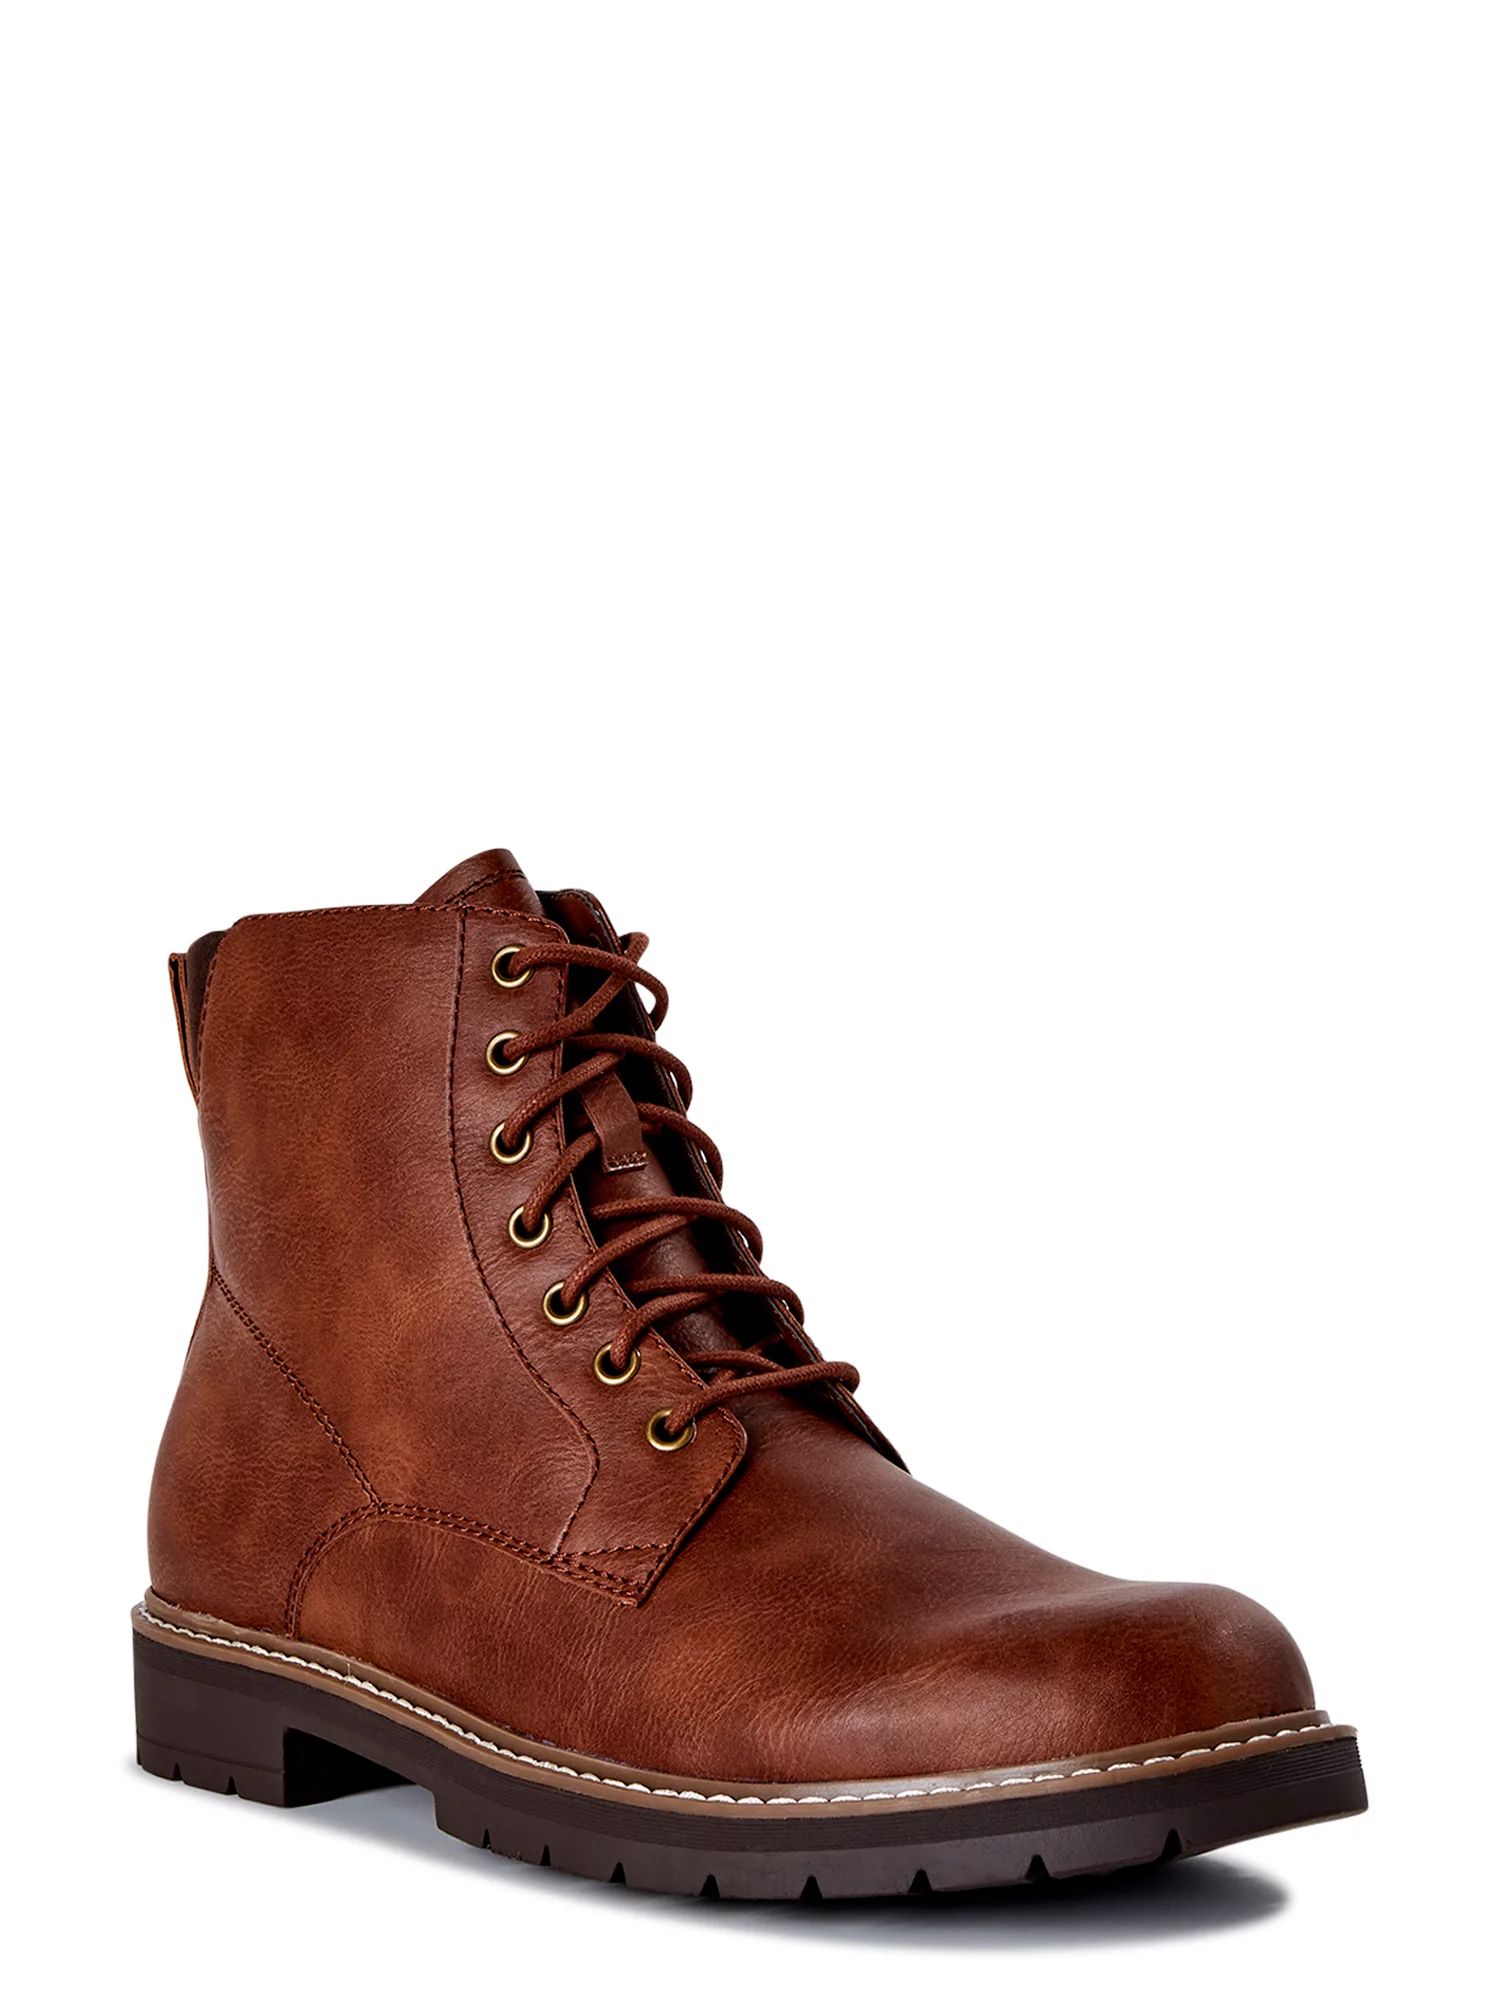 PORTLAND by Portland Boot Company Men's Casual Lace-up Boots | Walmart (US)